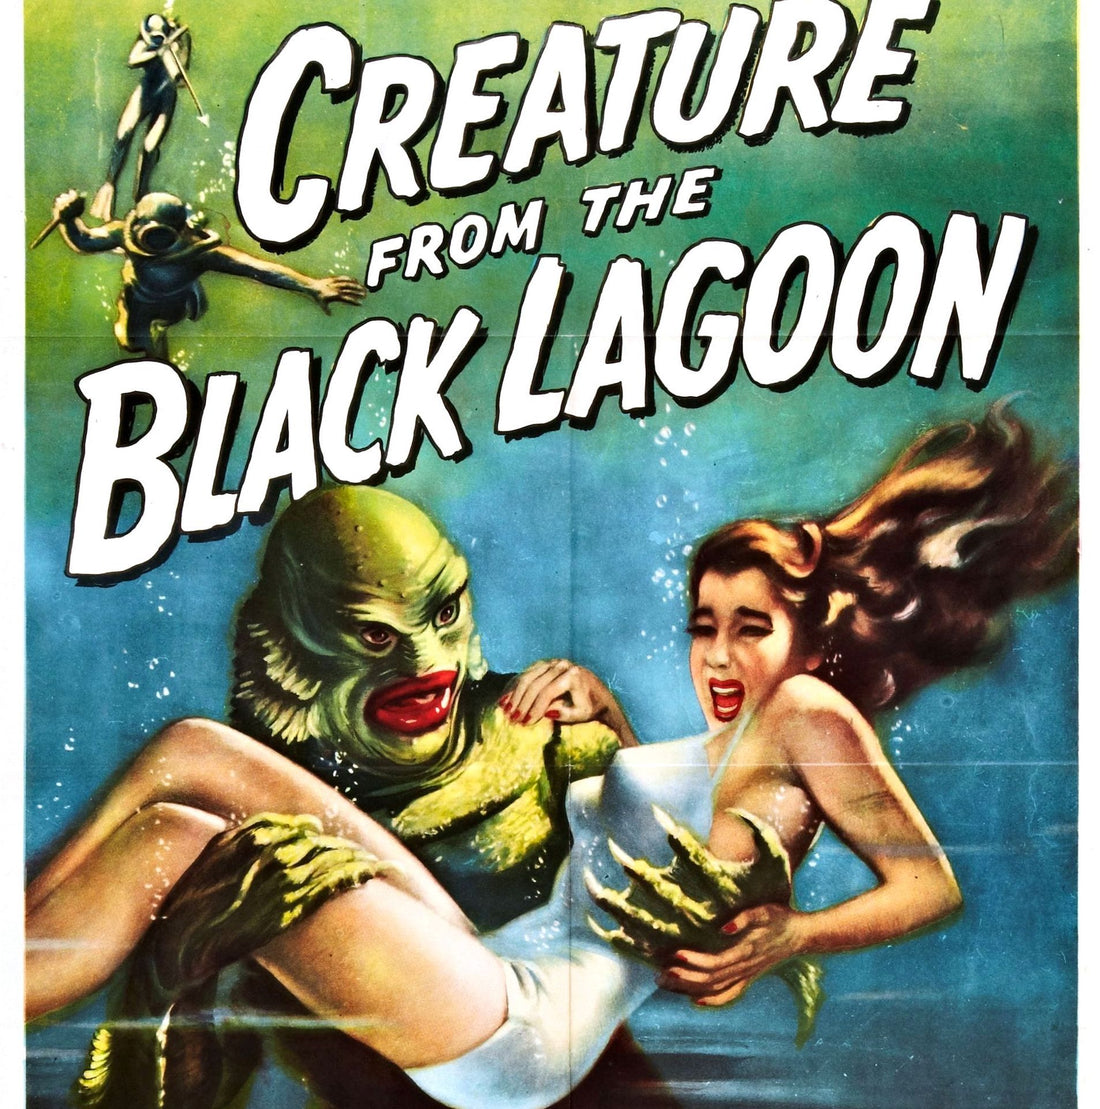 Episode 231: Creature From The Black Lagoon